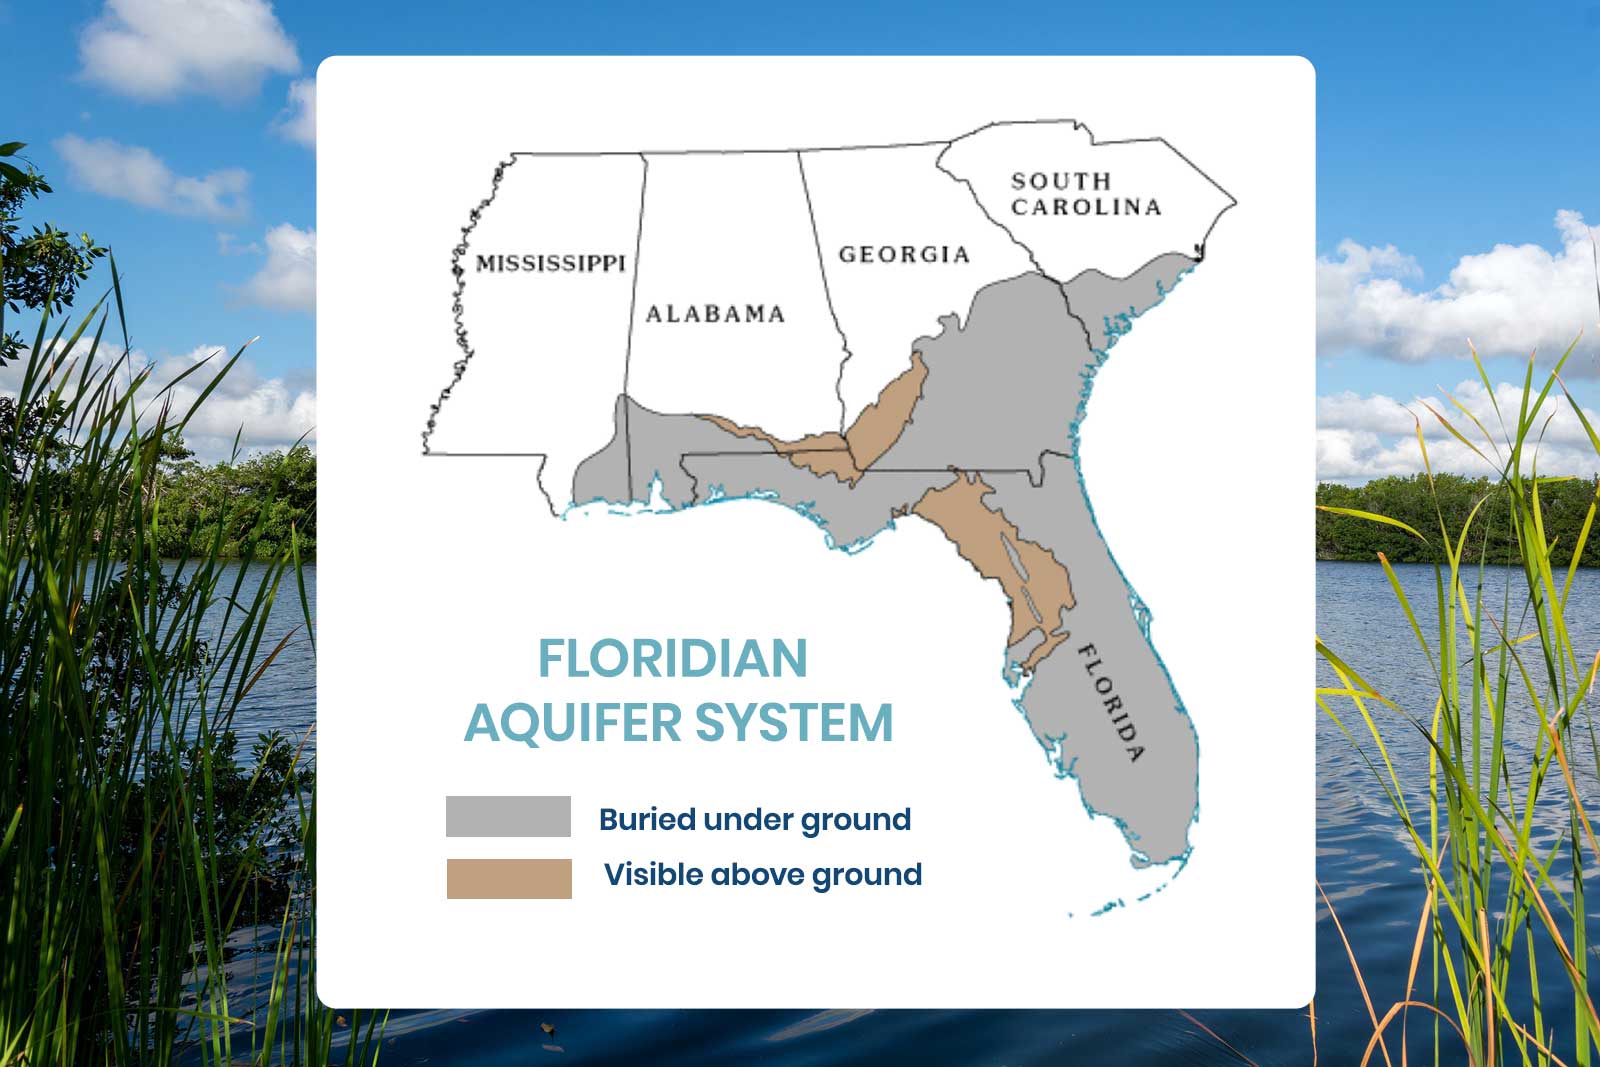 Chart with a background photo from the Florida everglades. On top is a white chart showing the states Florida, South Carolina, Georgia, Alabama, and Mississippi. All of Florida and the lower portions of Alabama, Georgia, and South Carolina are covered in a gray color that indicates by they key "buried underground aquifer." There are a few light brown spots in Florida, Alabama, and Georgia that indicate above ground aquifer.